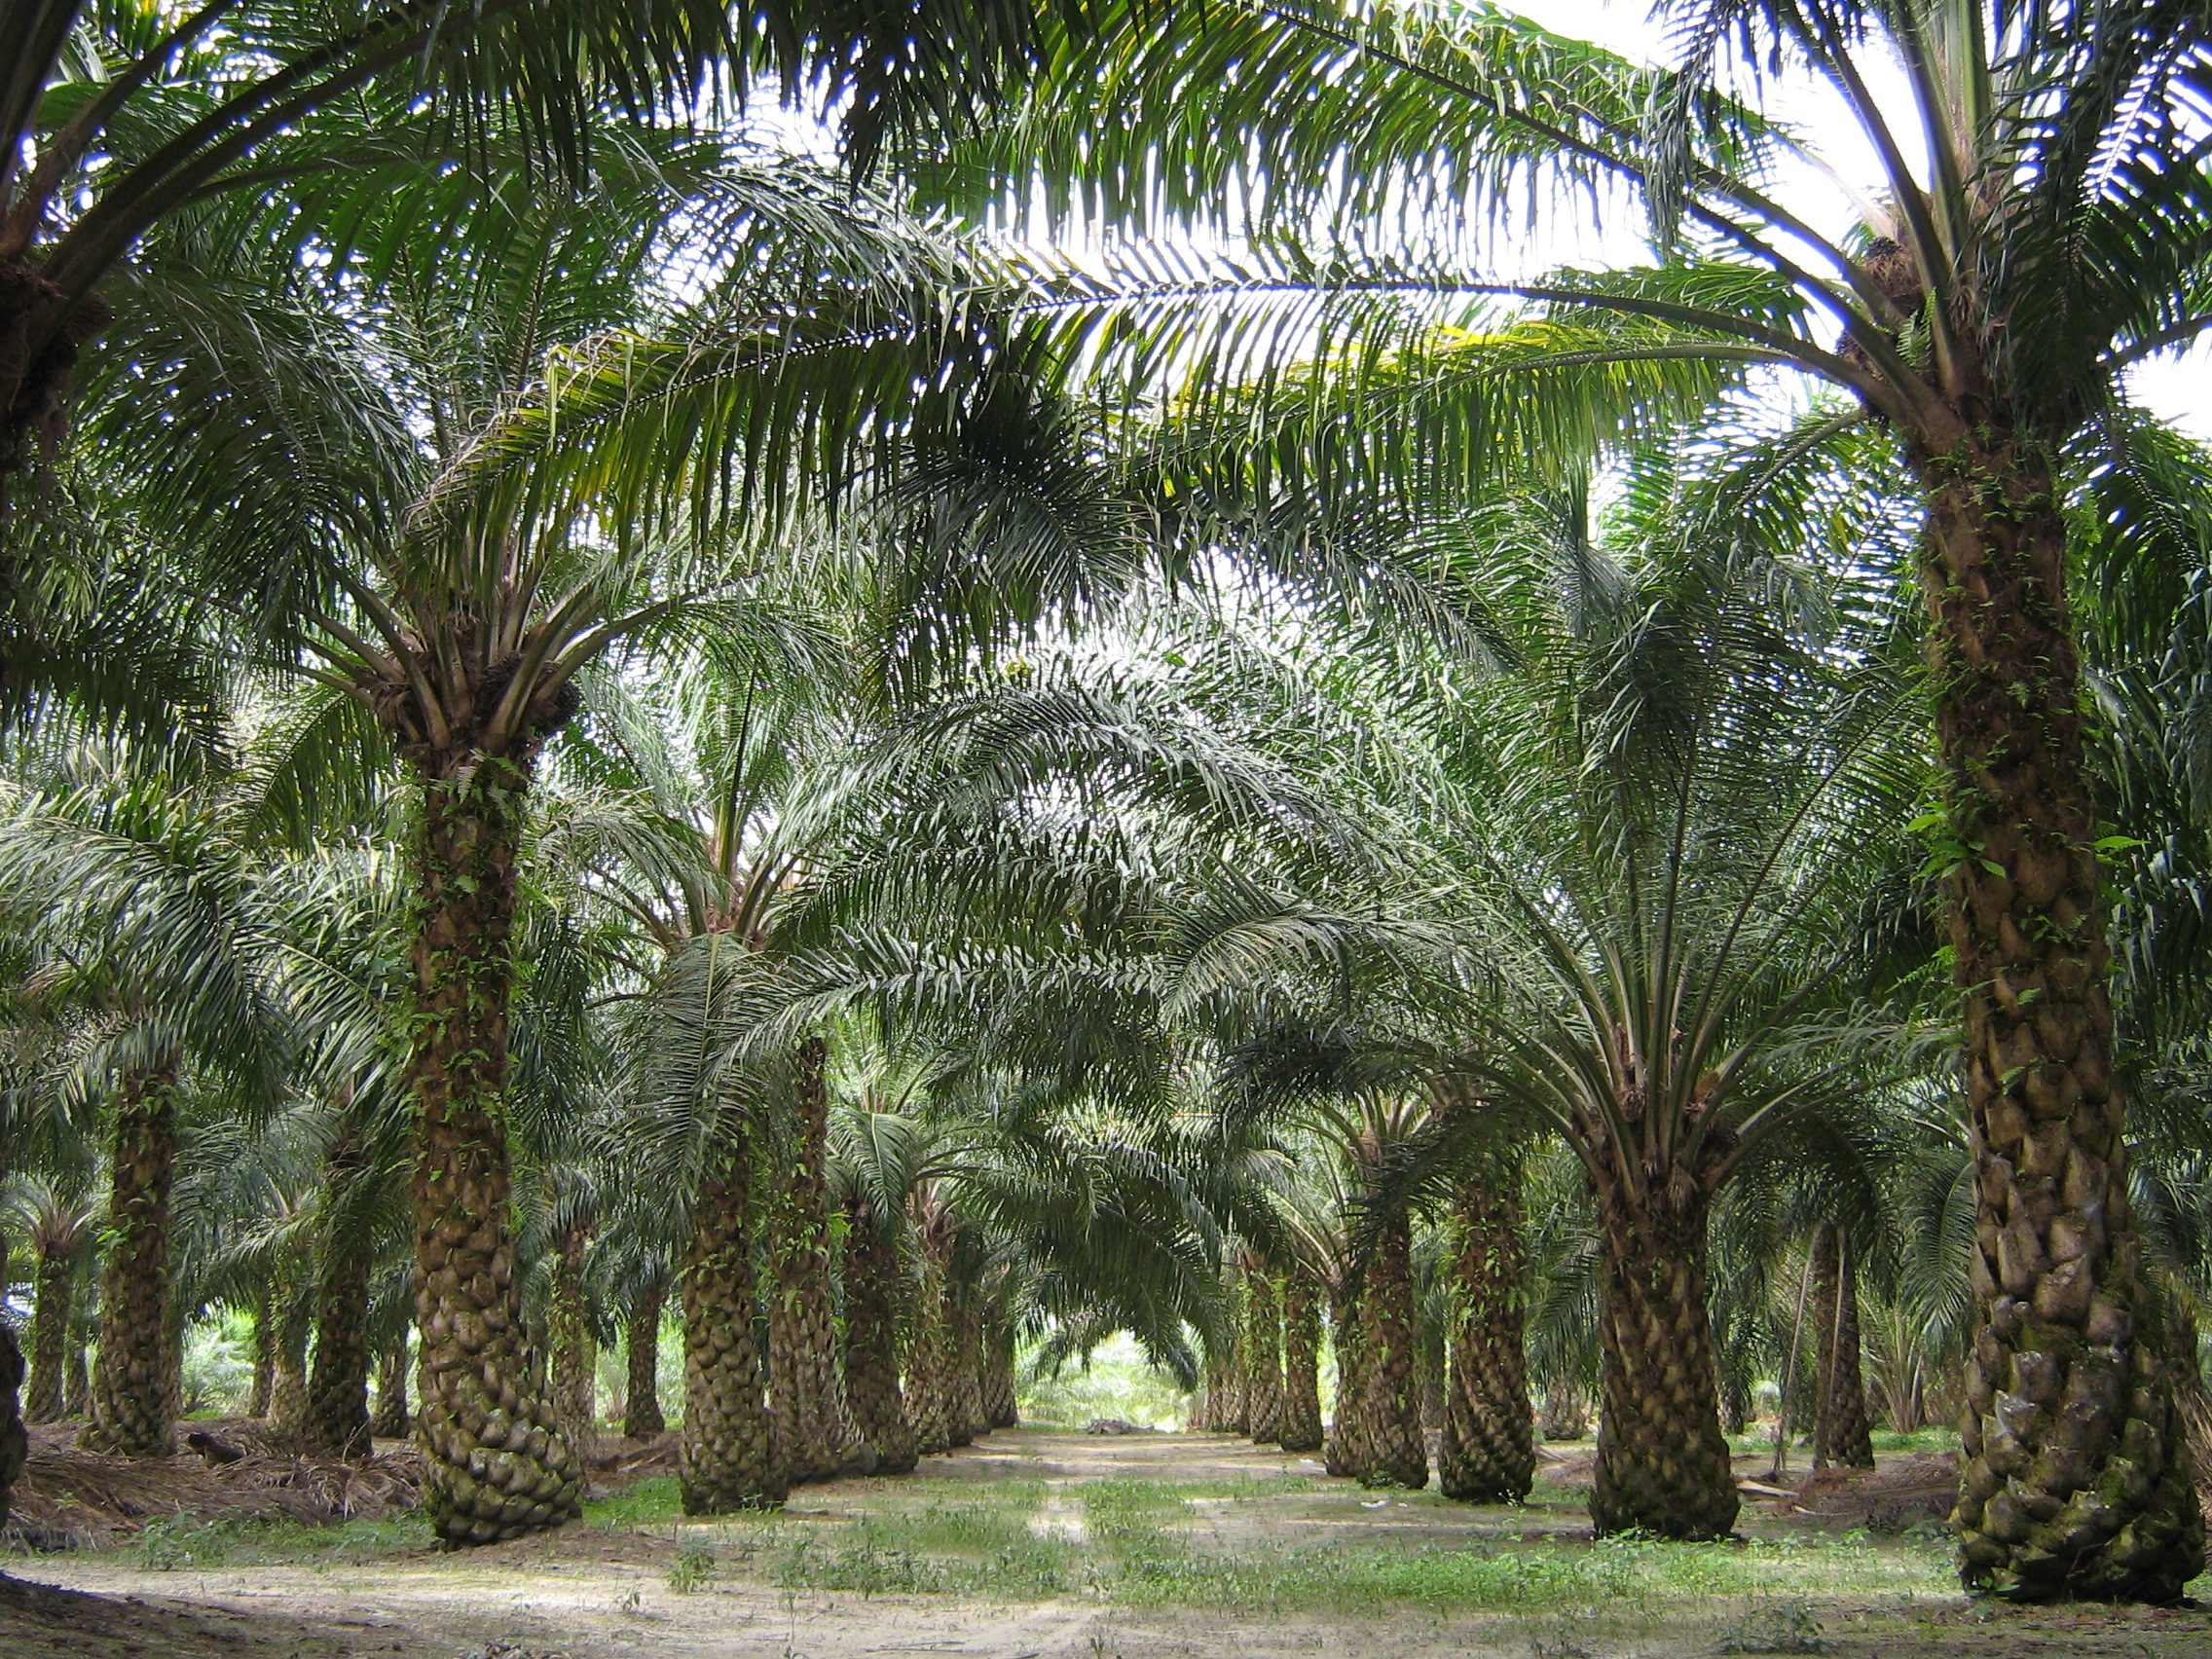 Telangana can Emerge as the Largest Oil Palm Destination in India